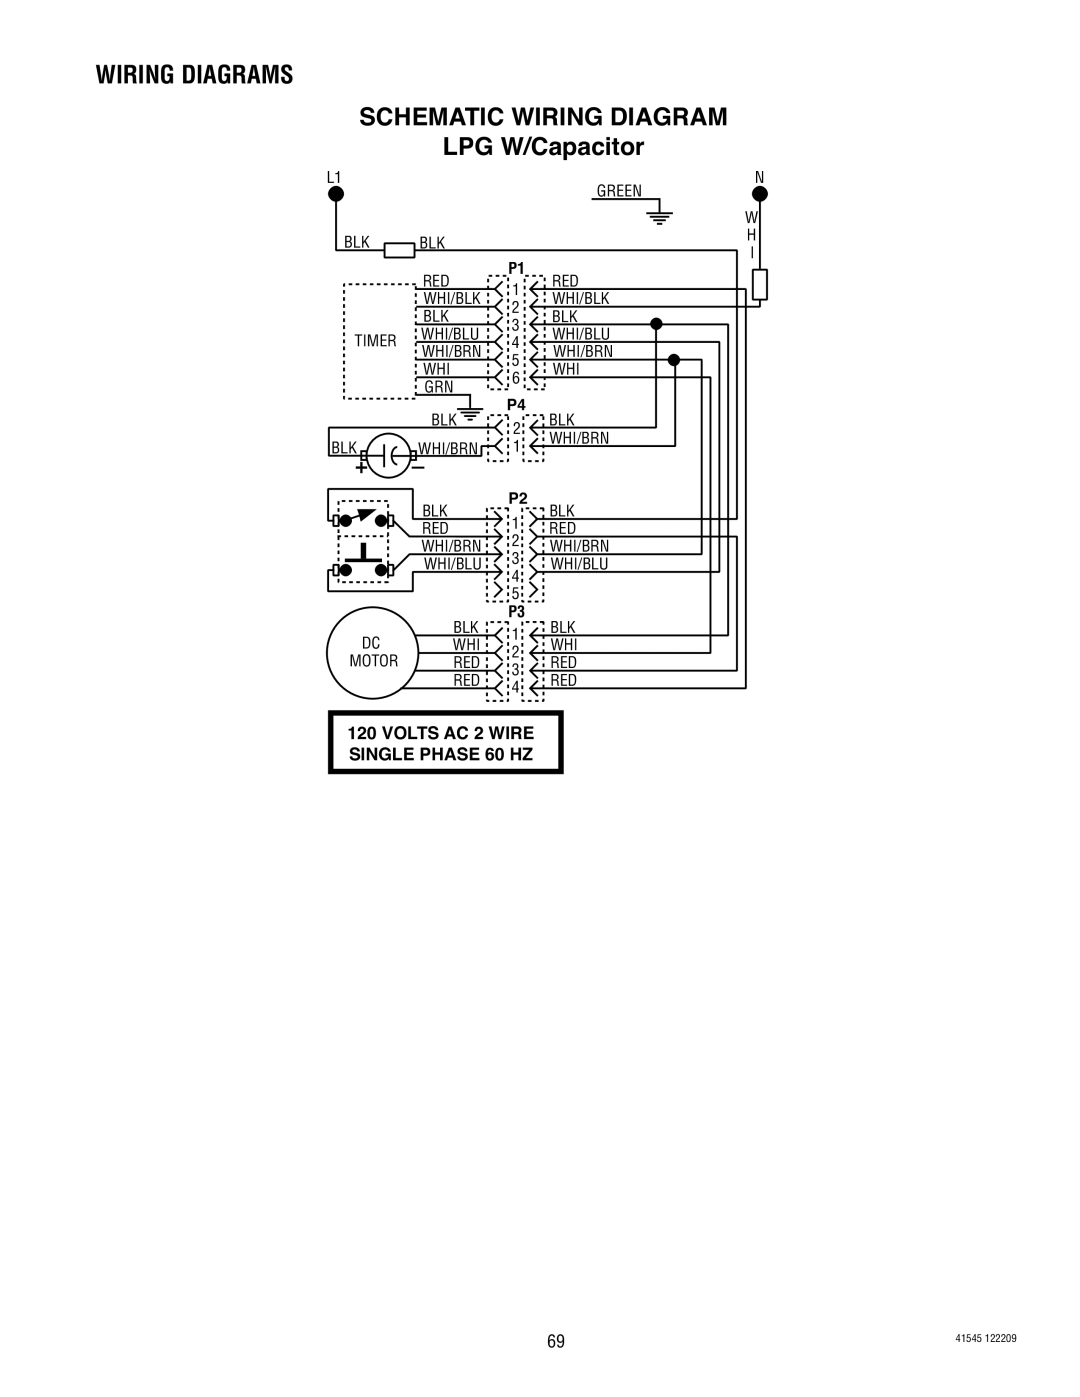 Bunn FPG-2, LPG-2, G9WD, G9-2 Wiring Diagrams Schematic Wiring Diagram, LPG W/Capacitor, VOLTS AC 2 WIRE SINGLE PHASE 60 HZ 